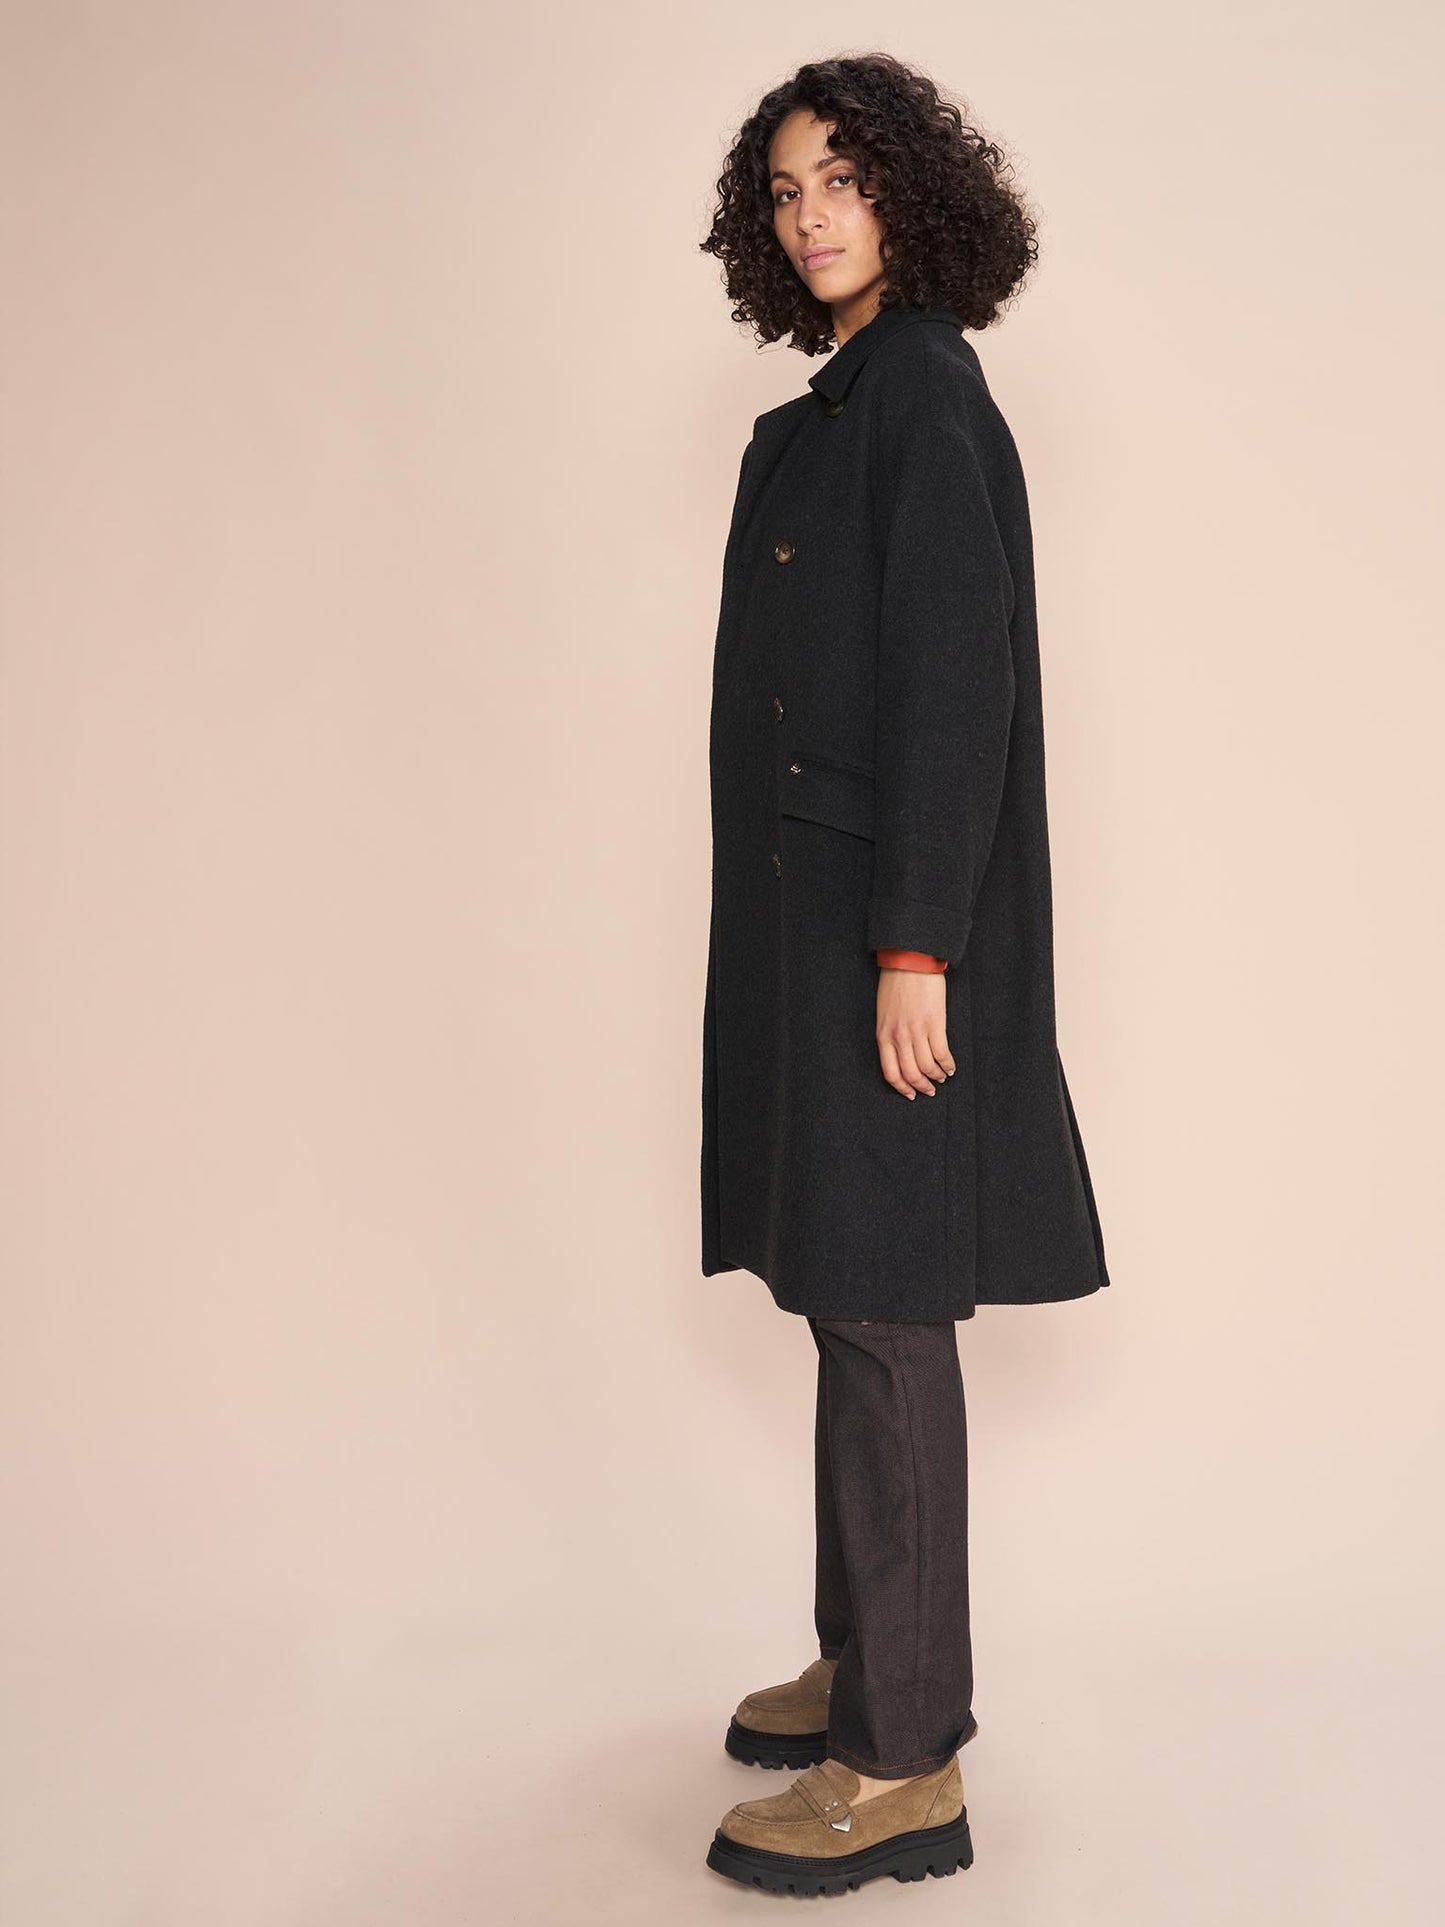 Model wearing Mos Mosh Venice Wool Pavement Coat from the side